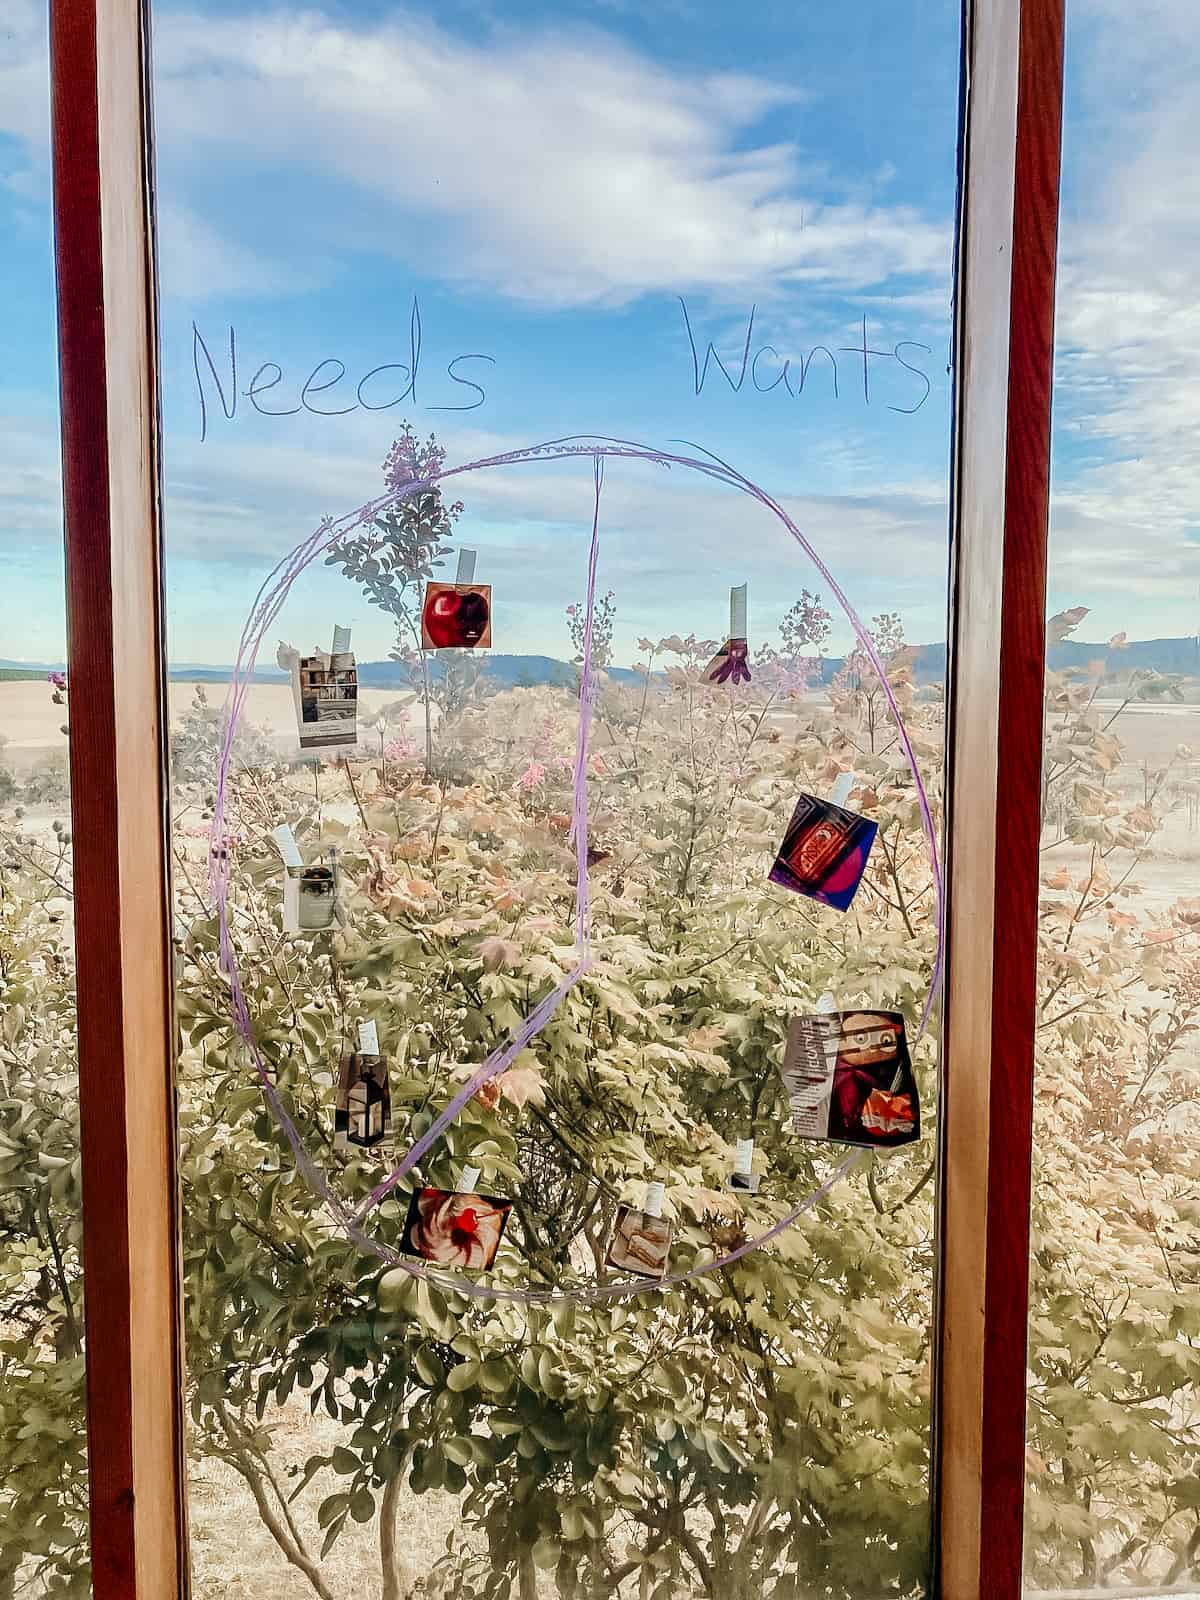 window with the words needs and wants, a circle with pictures taped inside